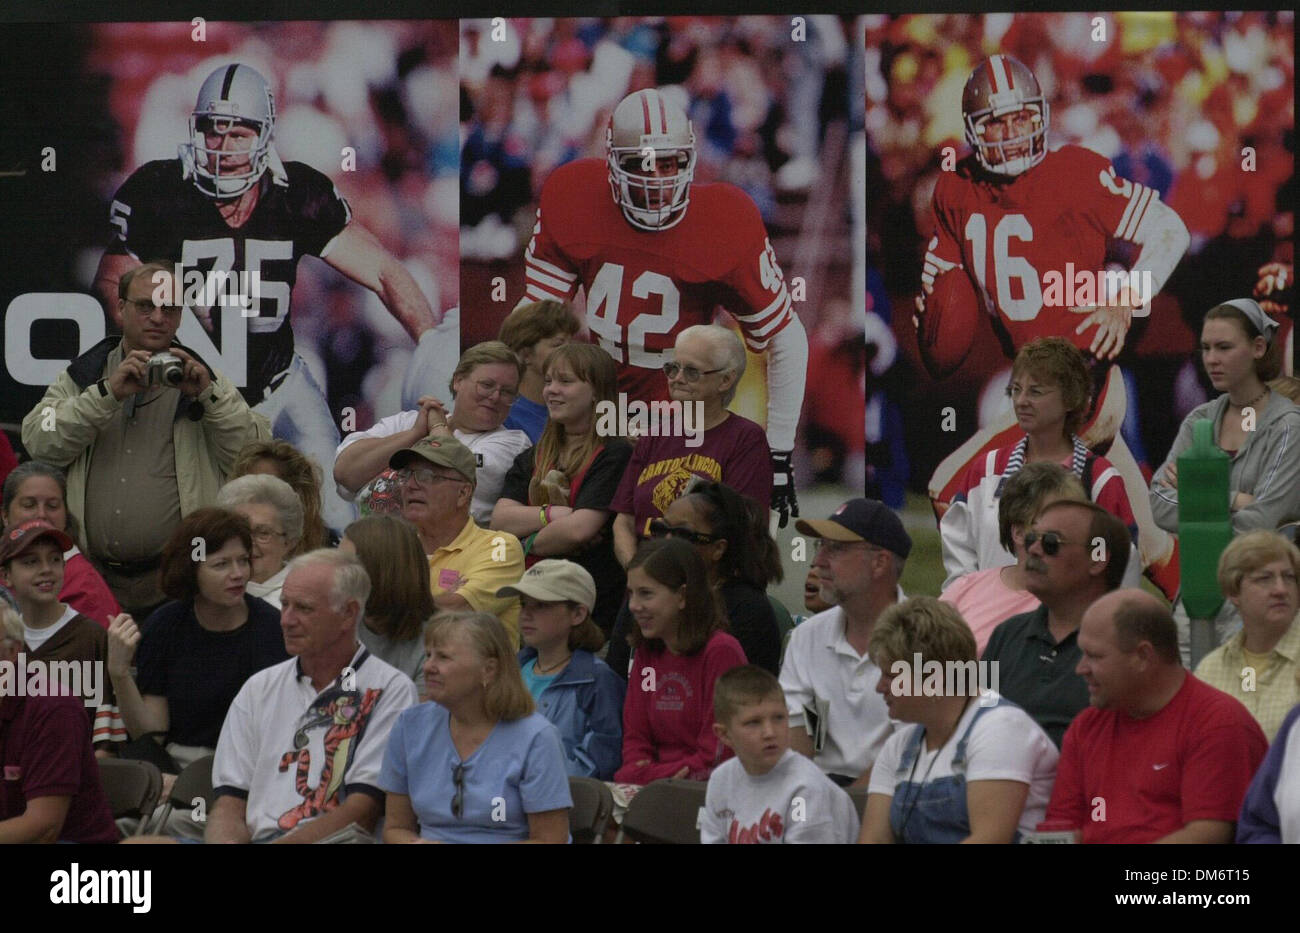 With posters of fotball greats Howie Long of the Raiders, and Ronnie Lott and Joe Montana of the 49ers, fans line Cleveland St in downtown Canton, OH 7/29/00 am to see them parade by in a parade, attended by thousands, honoring the Hall of Fame inductees.(Sac Bee/Chris Crewell)  /ZUMA Press Stock Photo